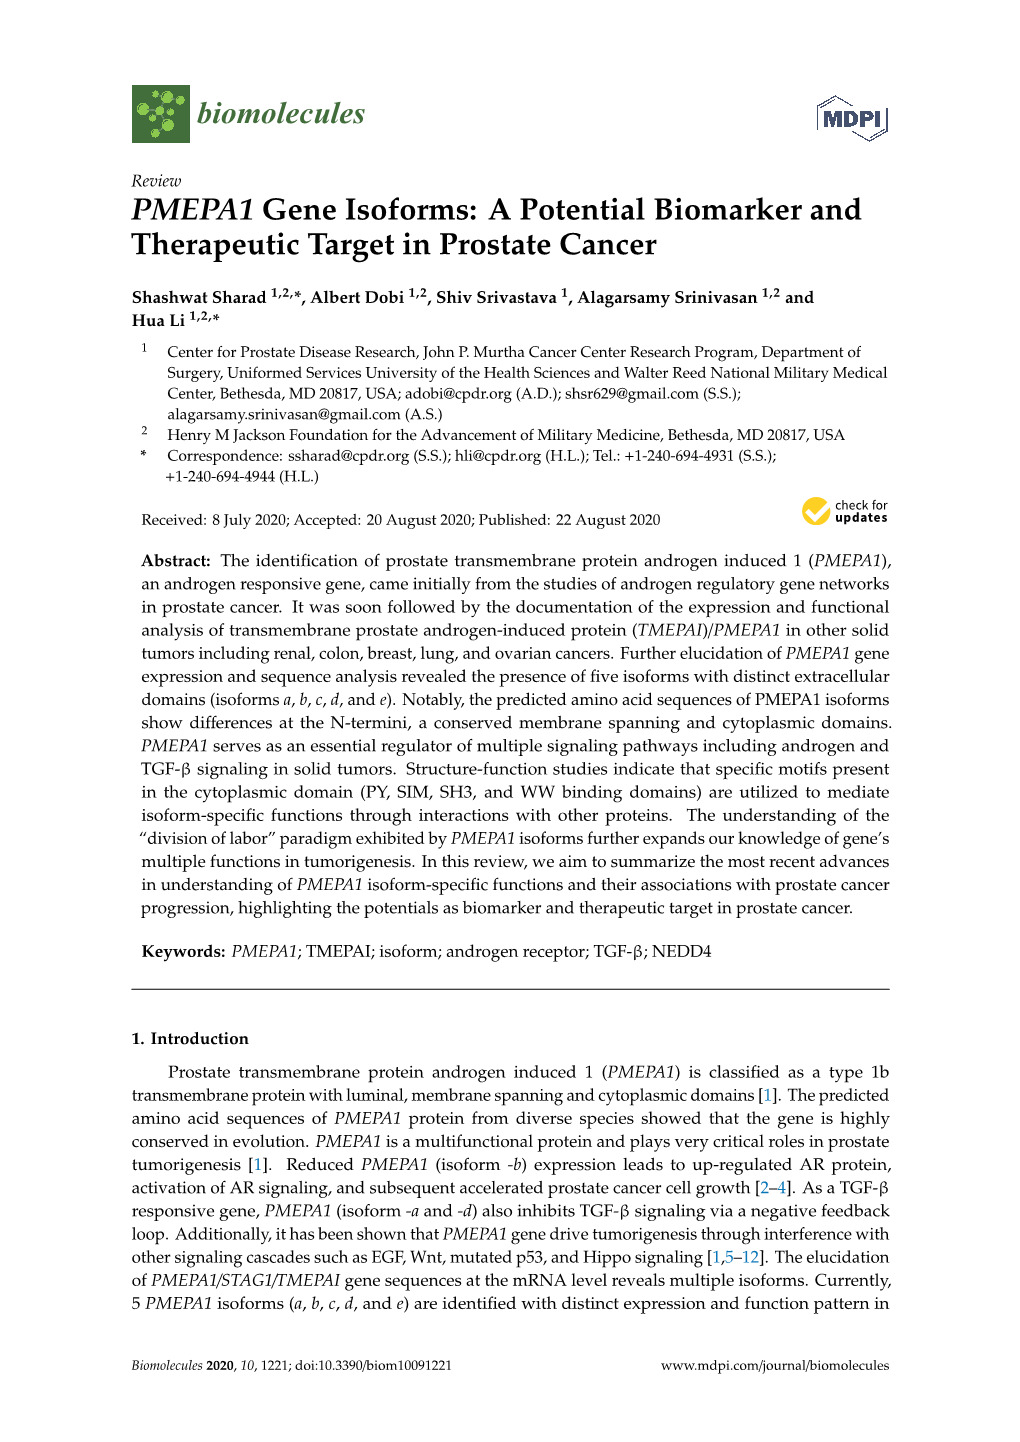 PMEPA1 Gene Isoforms: a Potential Biomarker and Therapeutic Target in Prostate Cancer